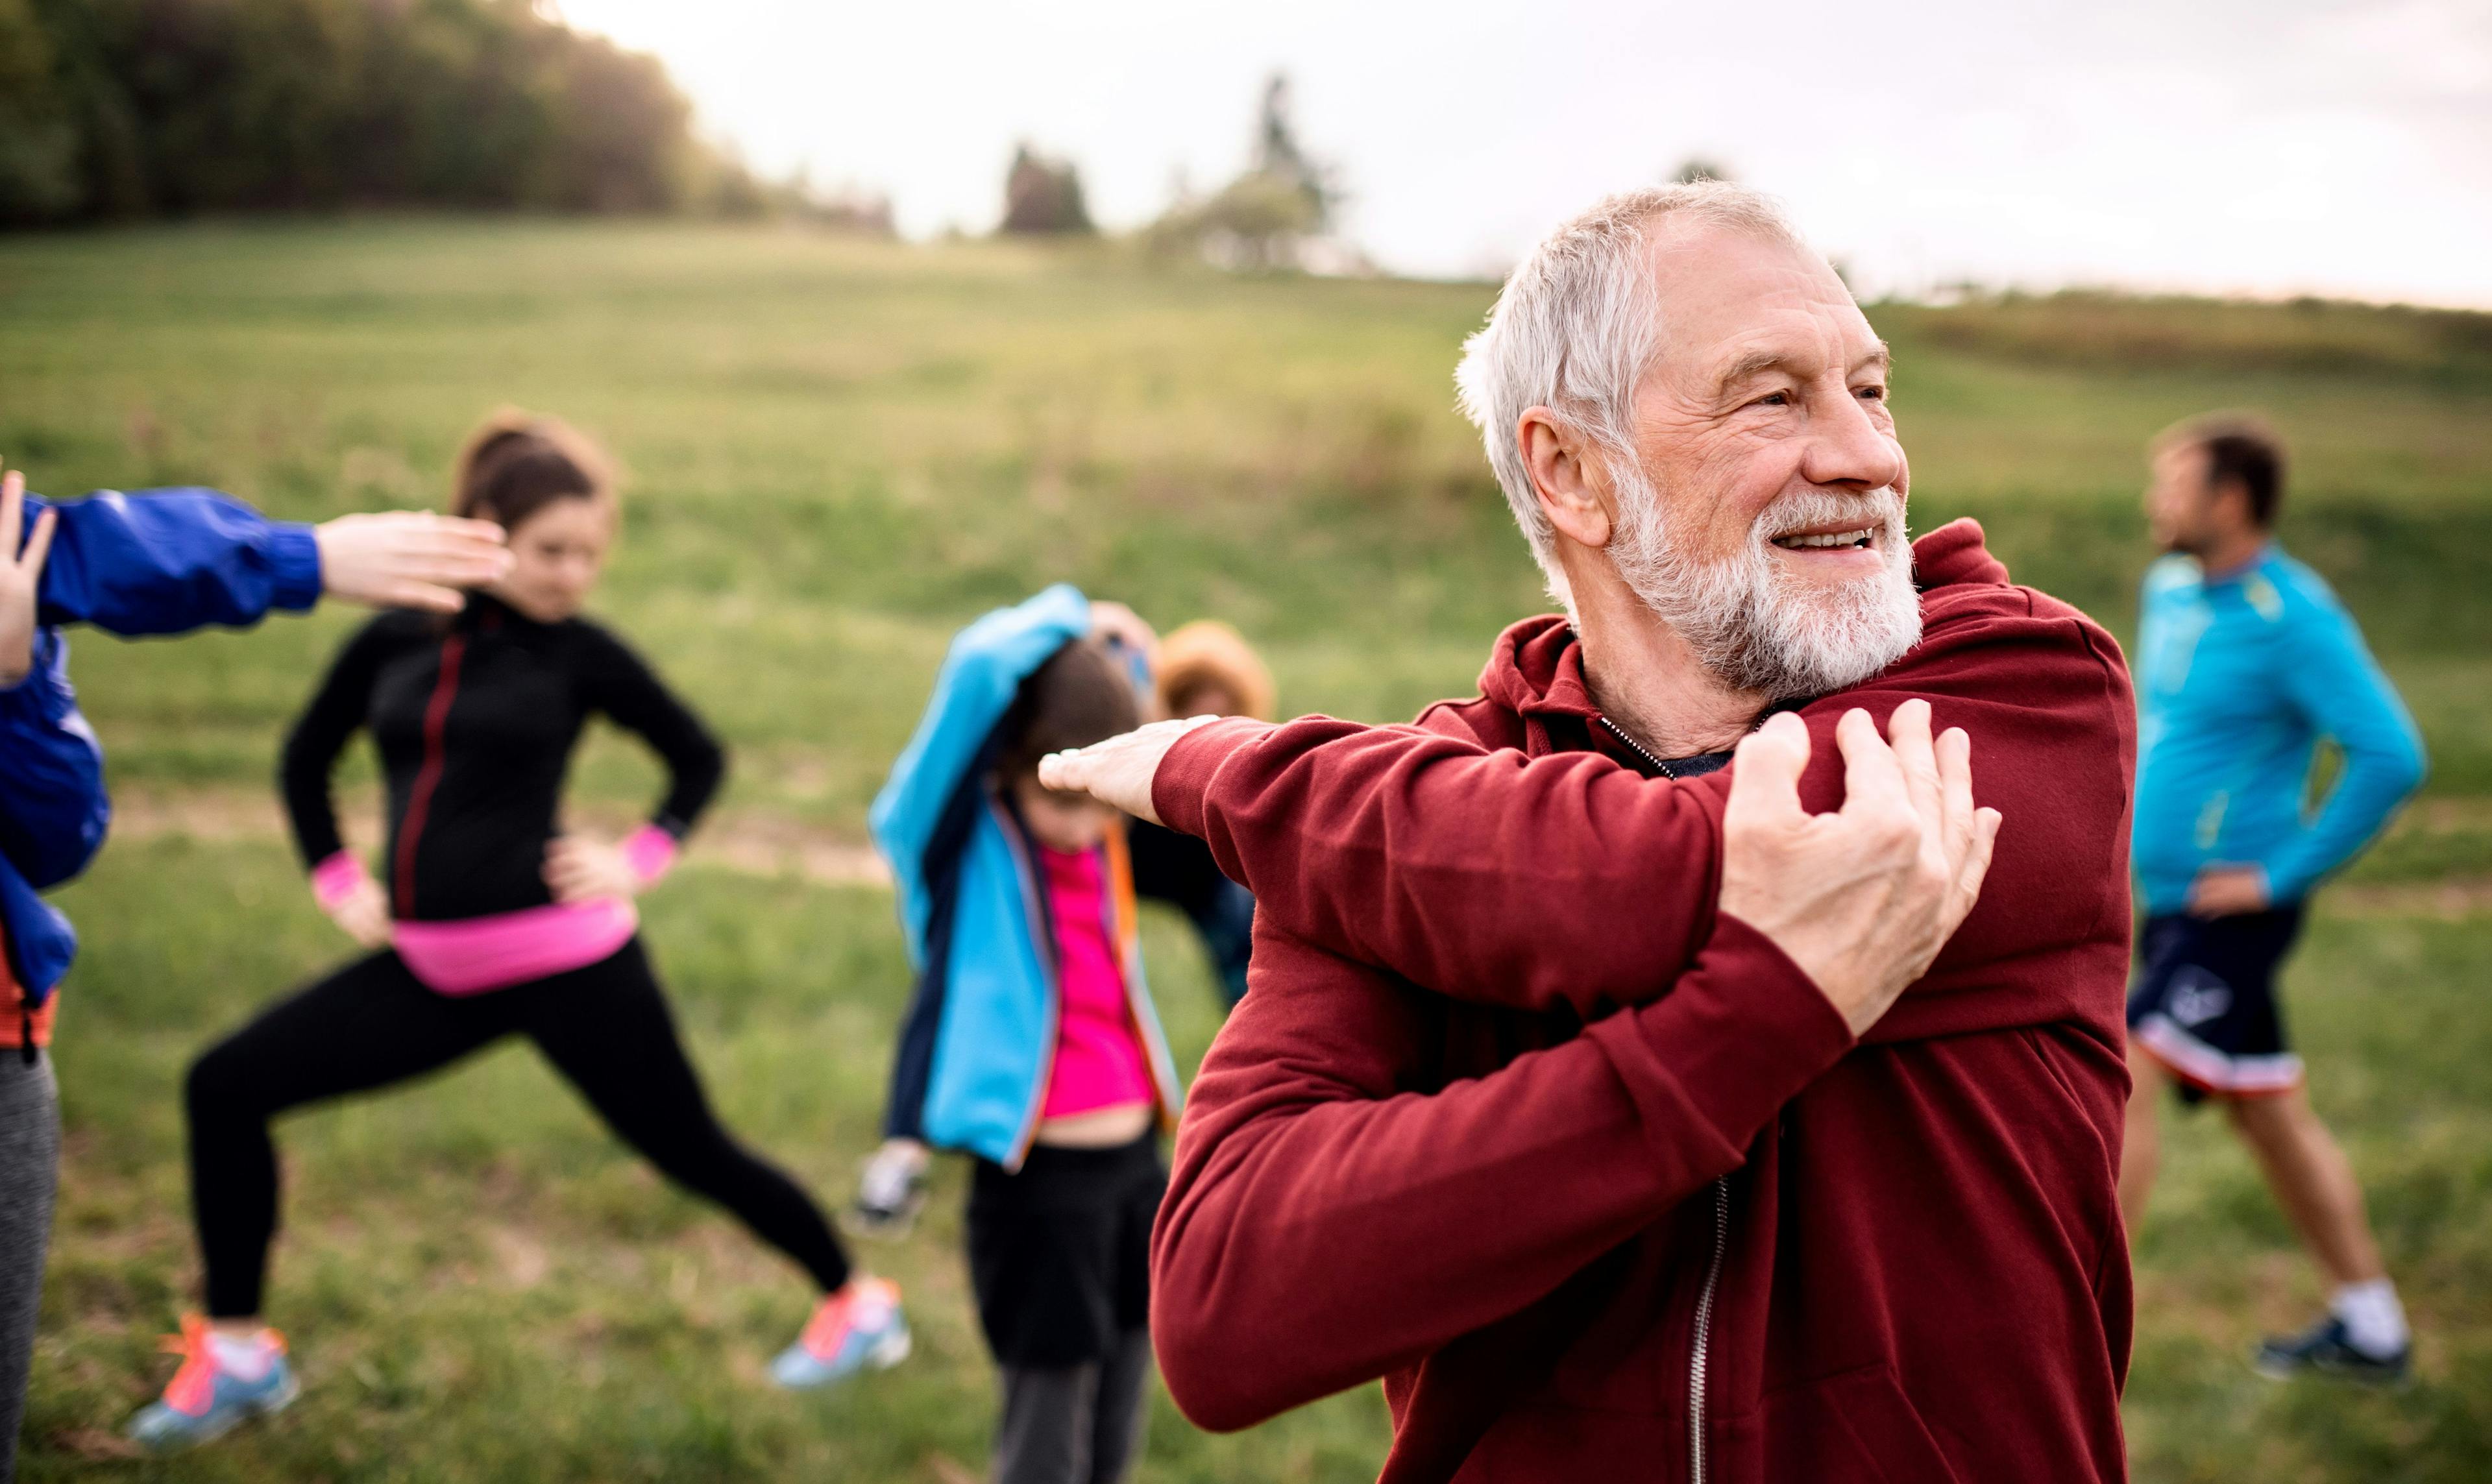 Aerobic activity and muscle strengthening exercises reduced the risk of pneumonia or influenza mortality, even when the exercises were completed less frequently than recommended.